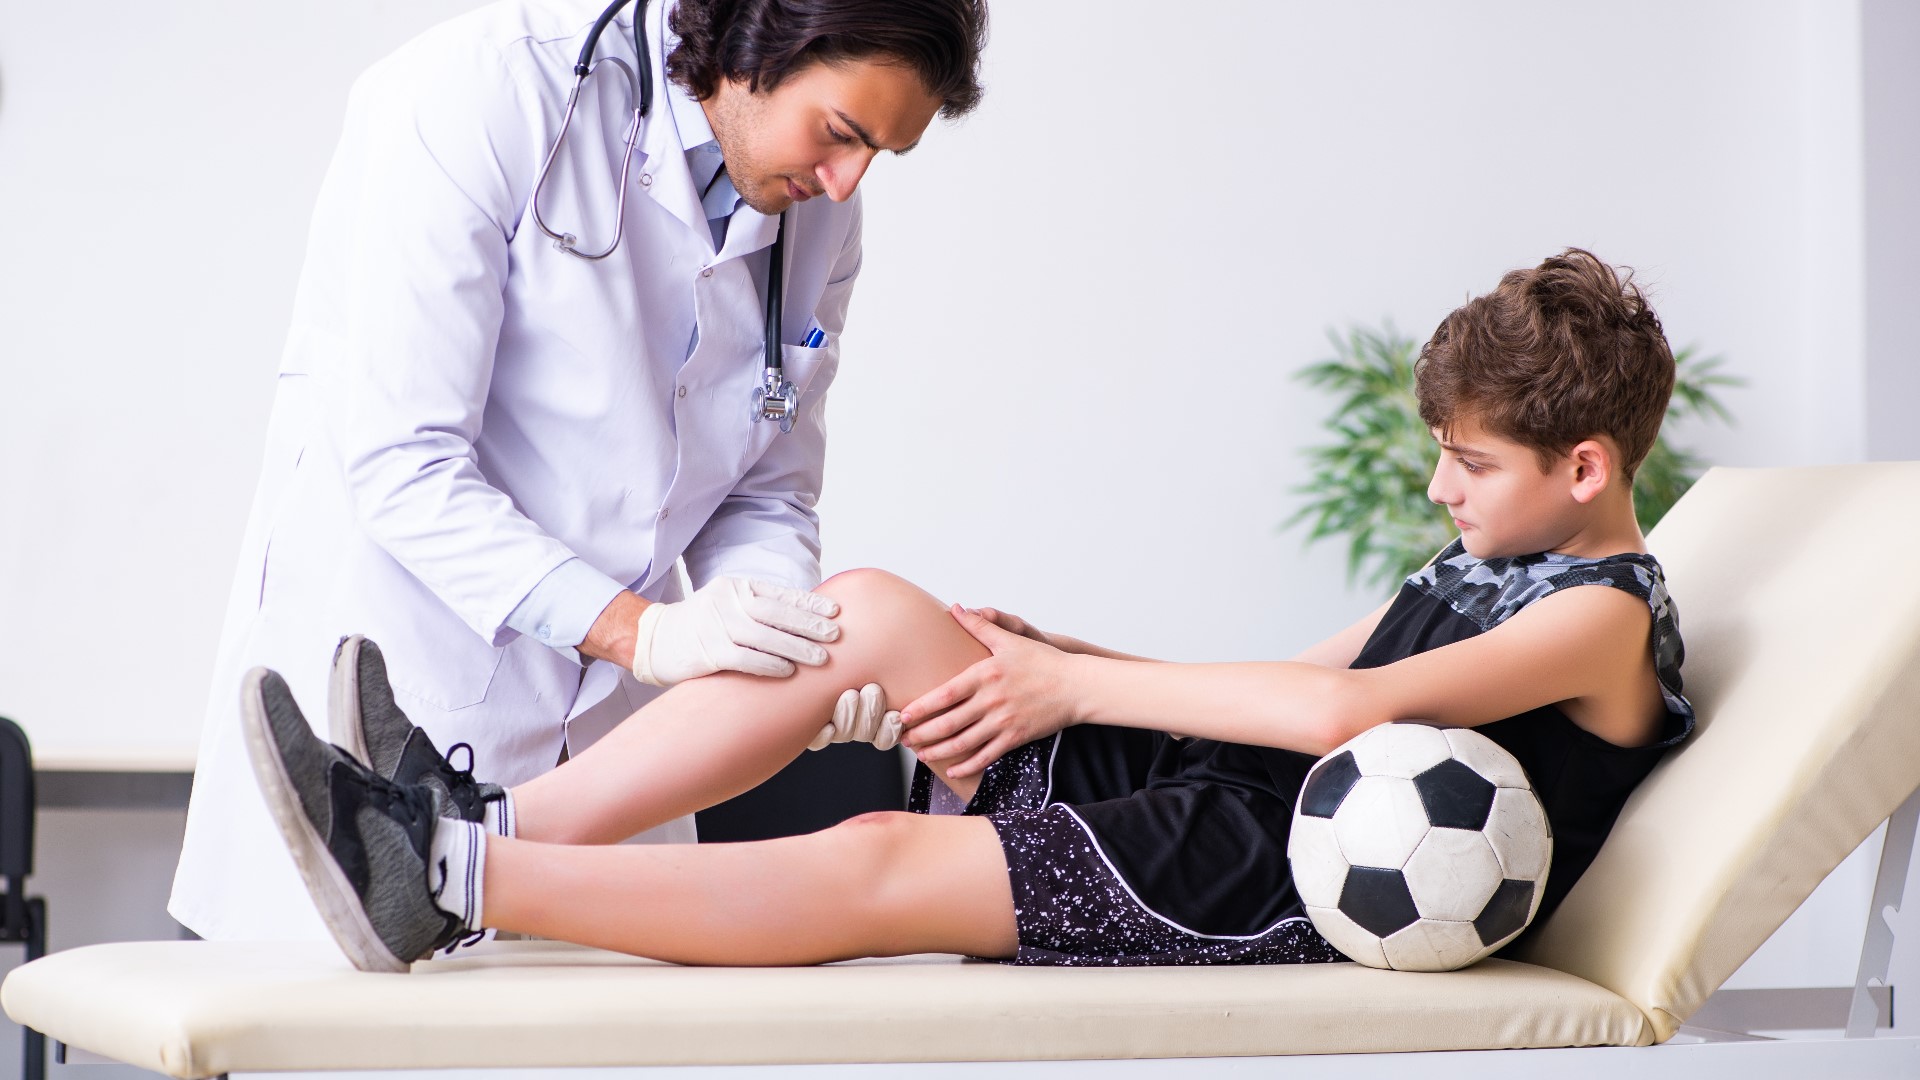 Dr. Jerod Felice from FX Physical Therapy shares how kids can prevent getting injured on the field while playing sports.